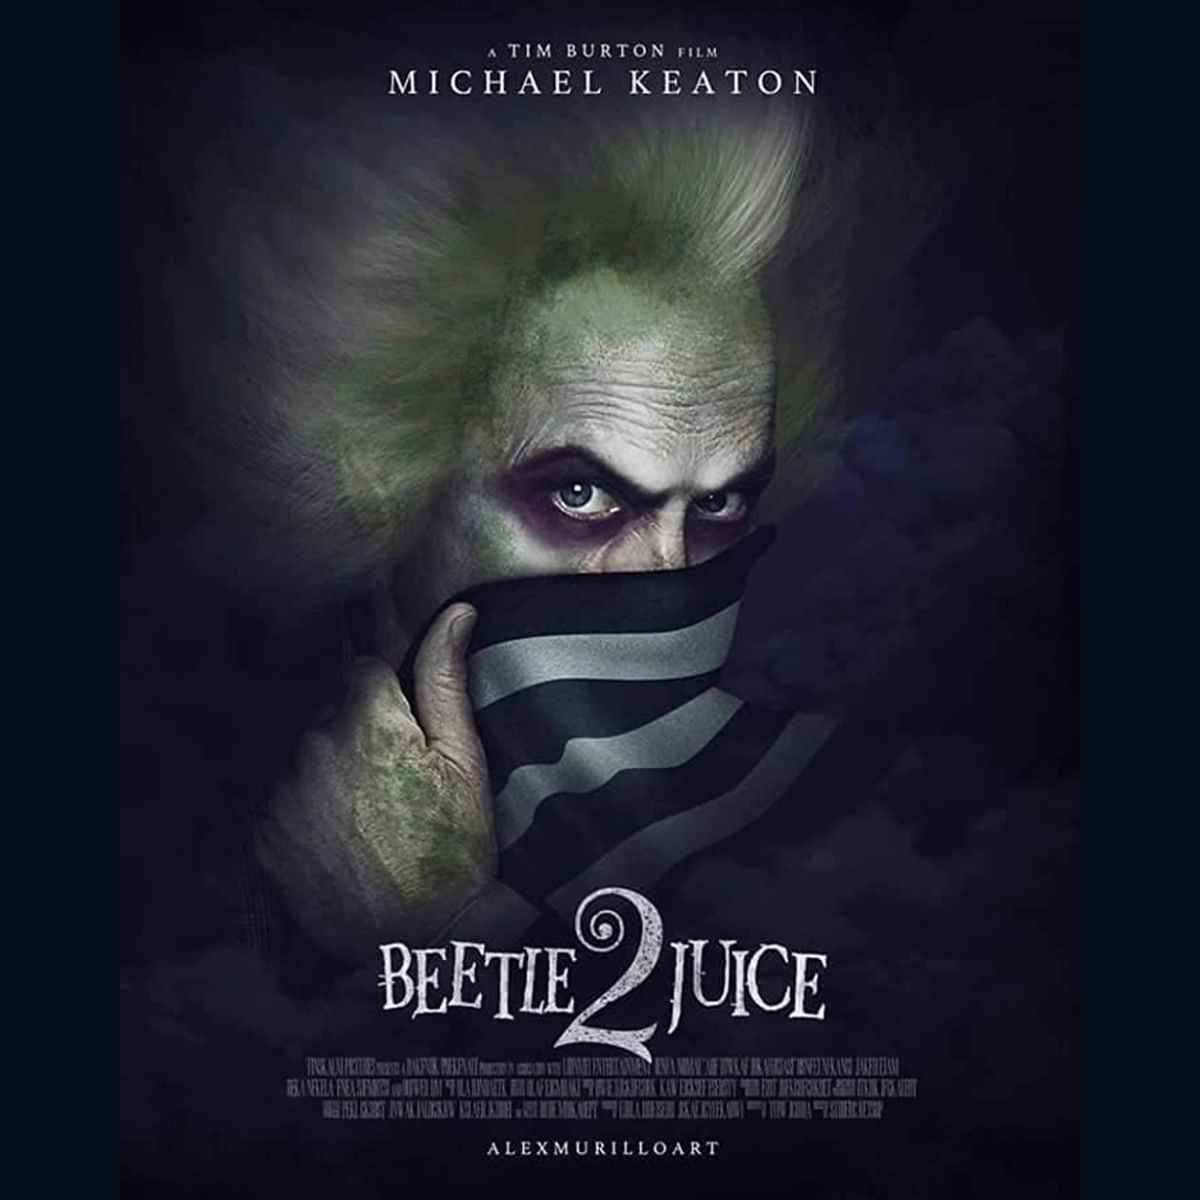 Behind the Scenes Beetlejuice 2 Exploring the Plot, Cast, and What